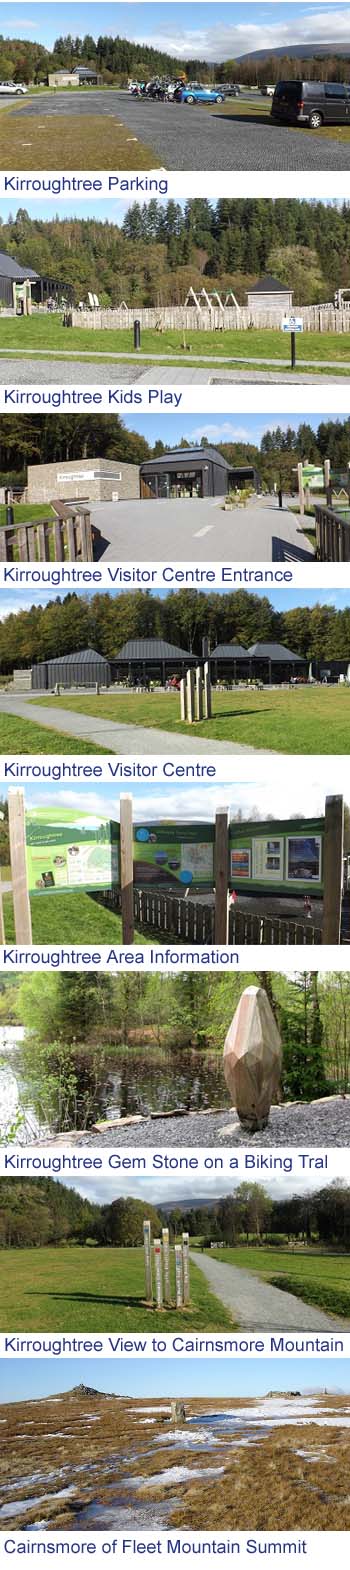 Kirroughtree Images